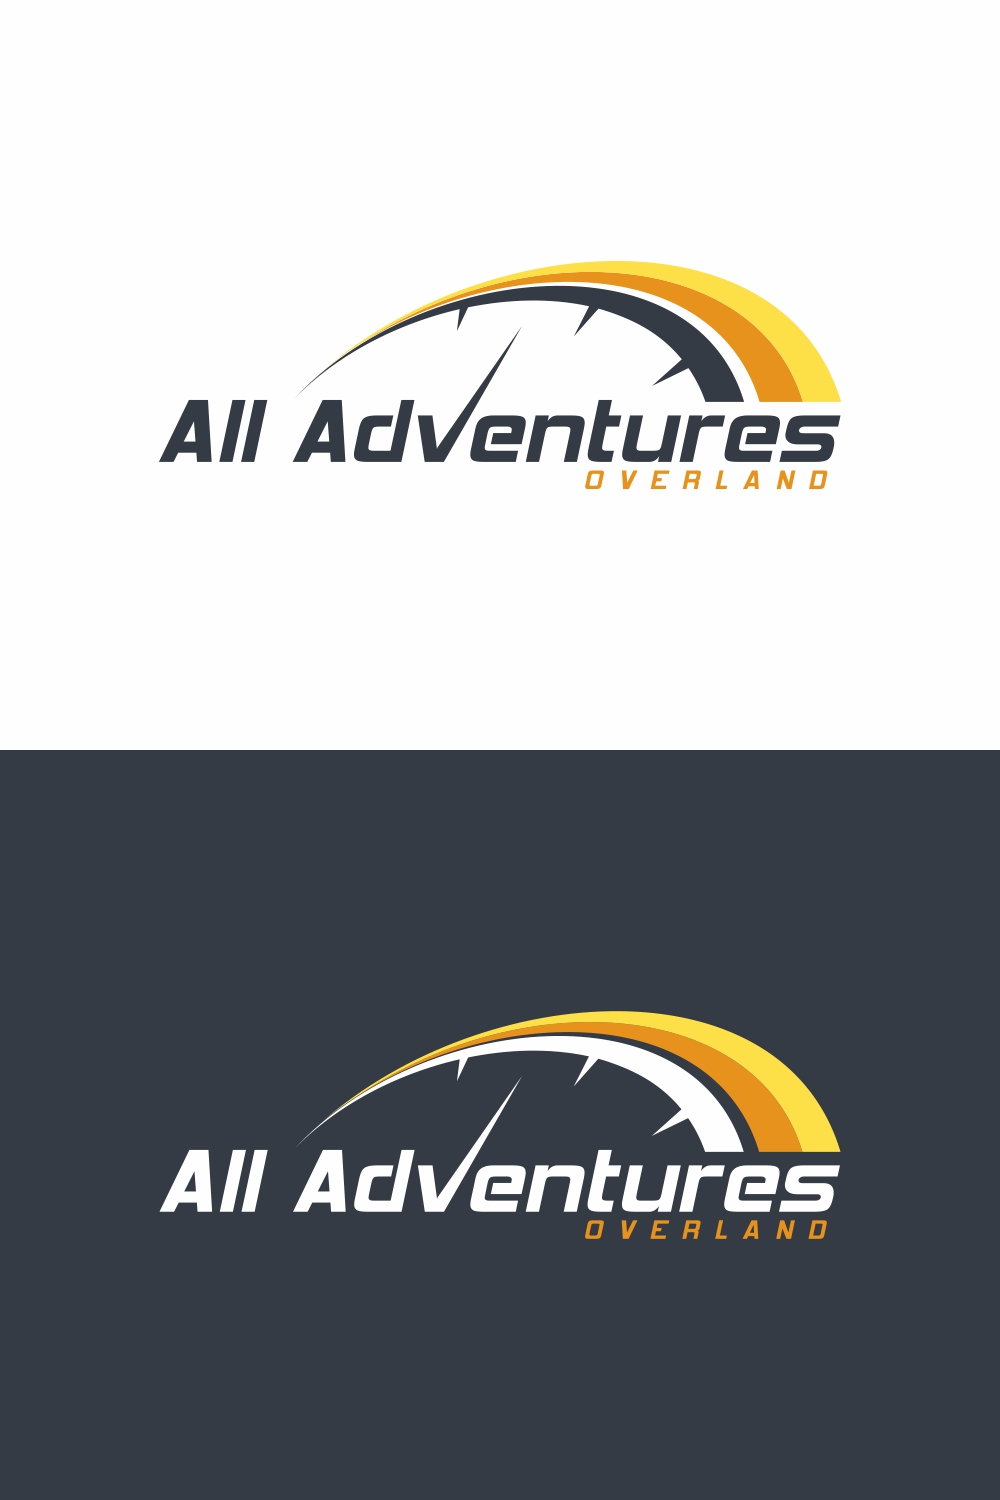 Speedometer logo design land adventure logo abstract symbol - only 5$ pinterest preview image.